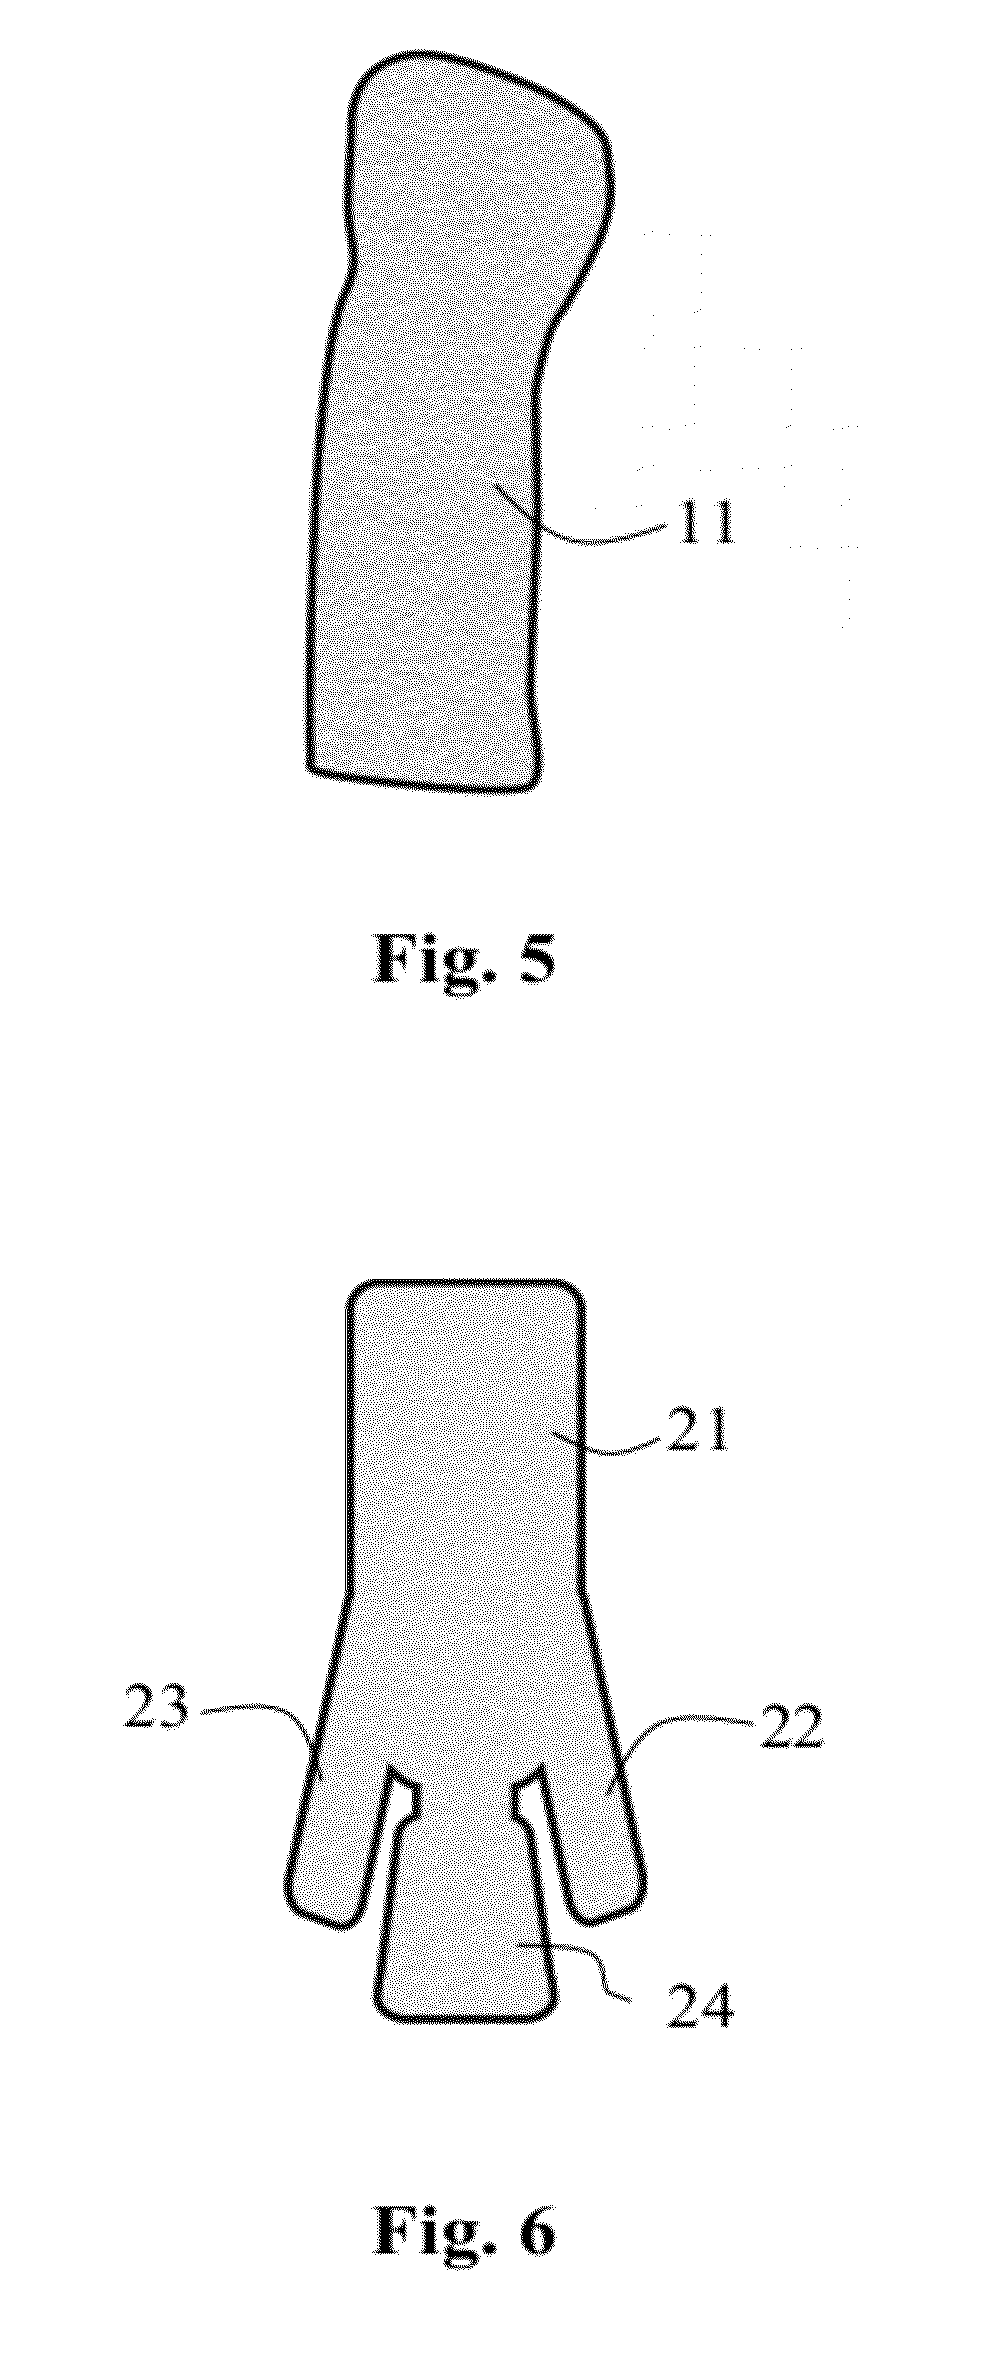 Novel composite materials comprising a thermoplastic matrix polymer and wood particles